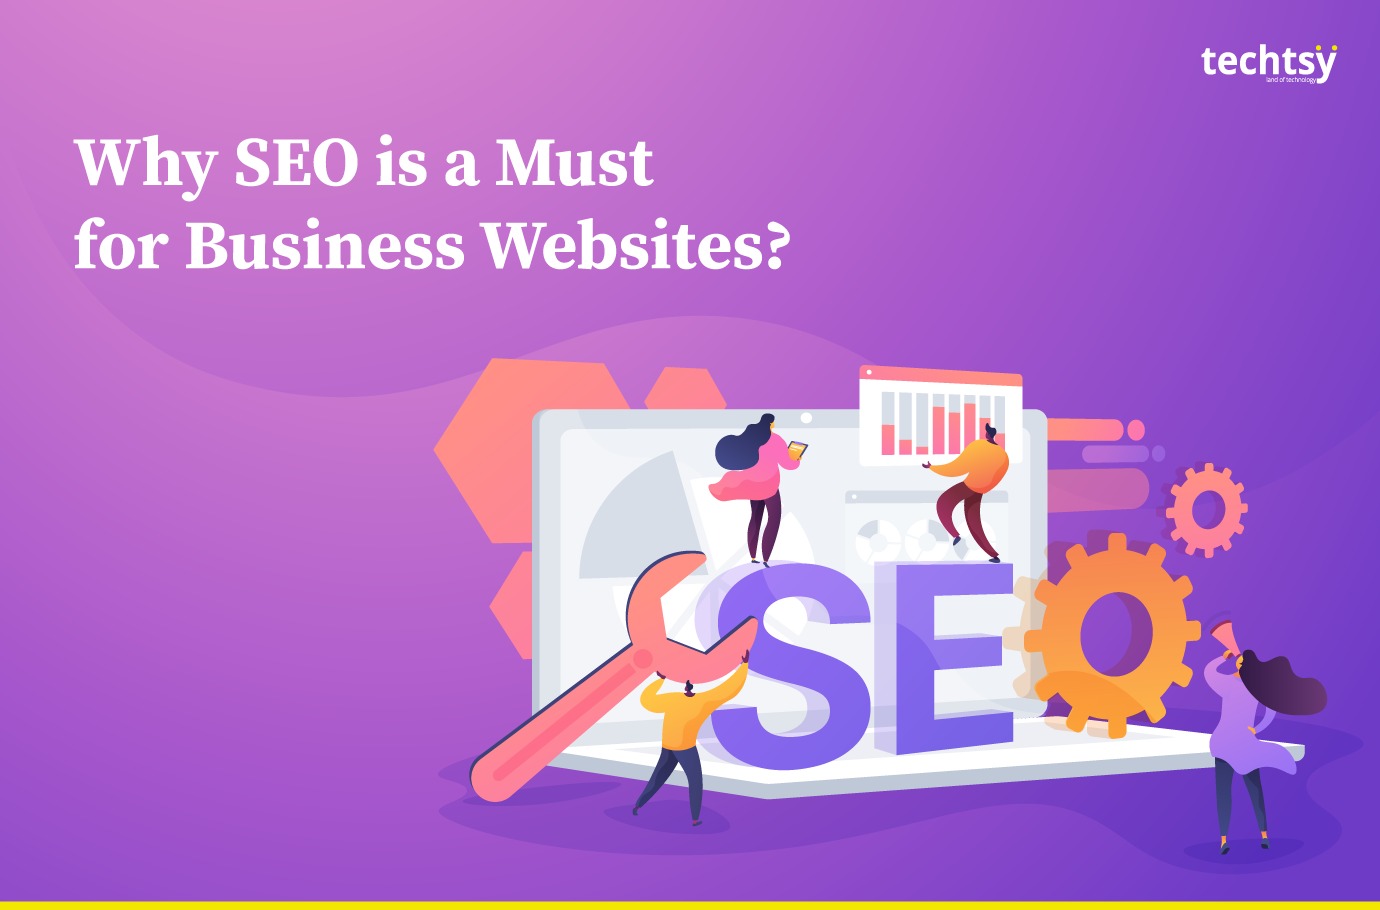 Why SEO is So Important for Your Business Website